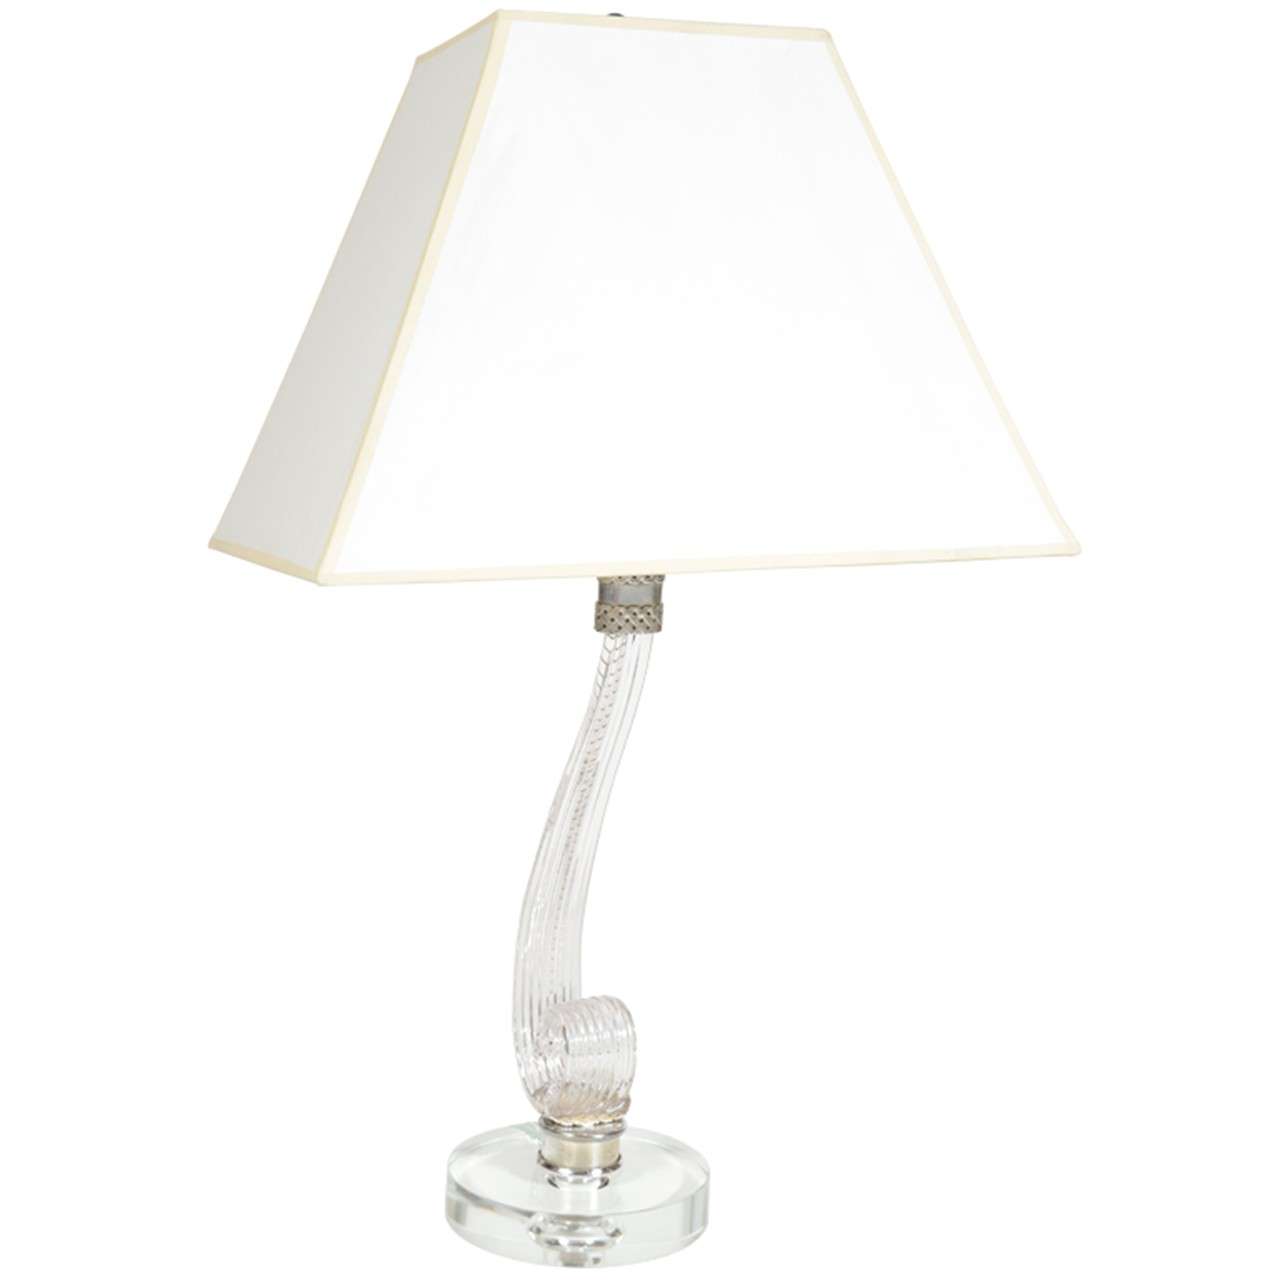 1940s  Hollywood Plume Table Lamp From The Devil Wears Prada